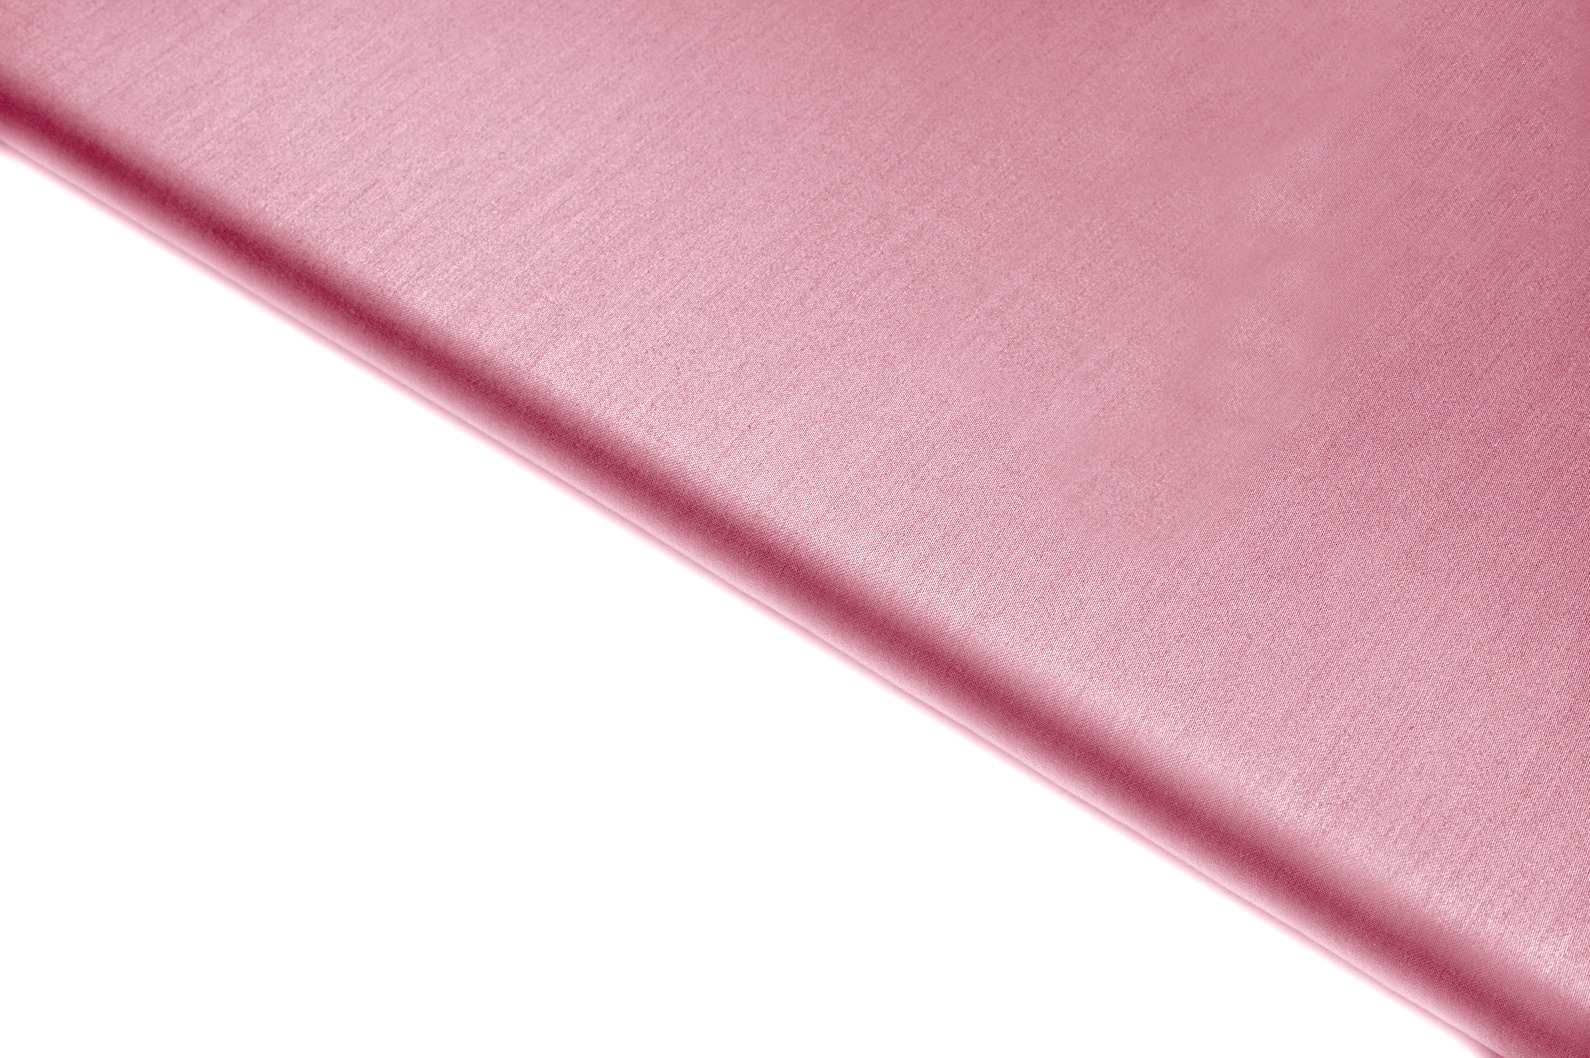 PUNCH PINK COLOR GLOSSY FINISH COTTON SATIN PLAIN FABRIC 10501